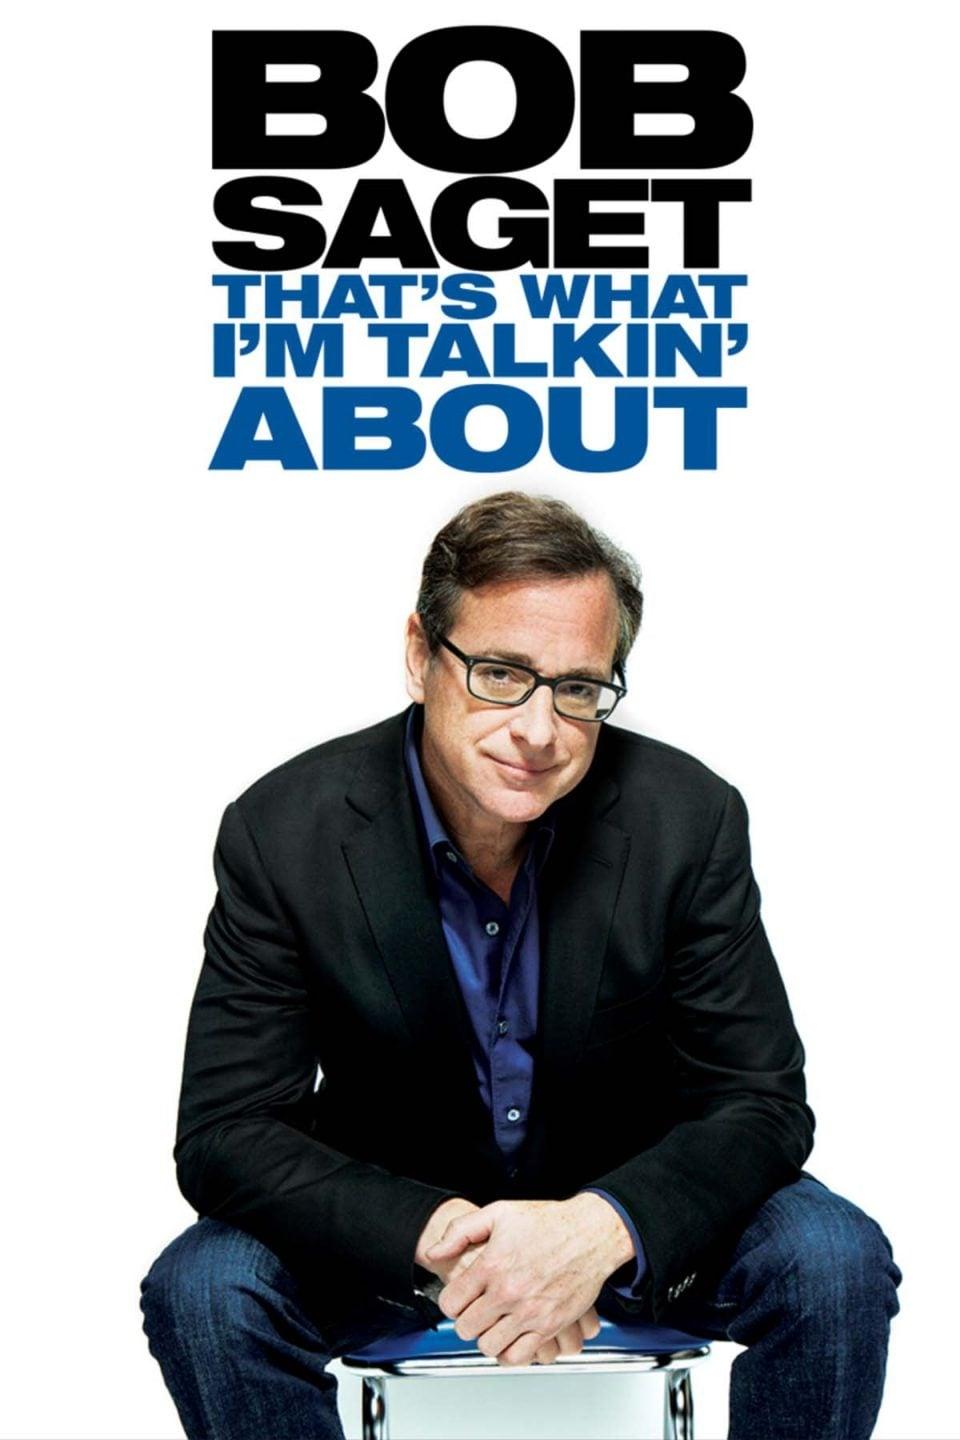 Bob Saget: That's What I'm Talking About poster